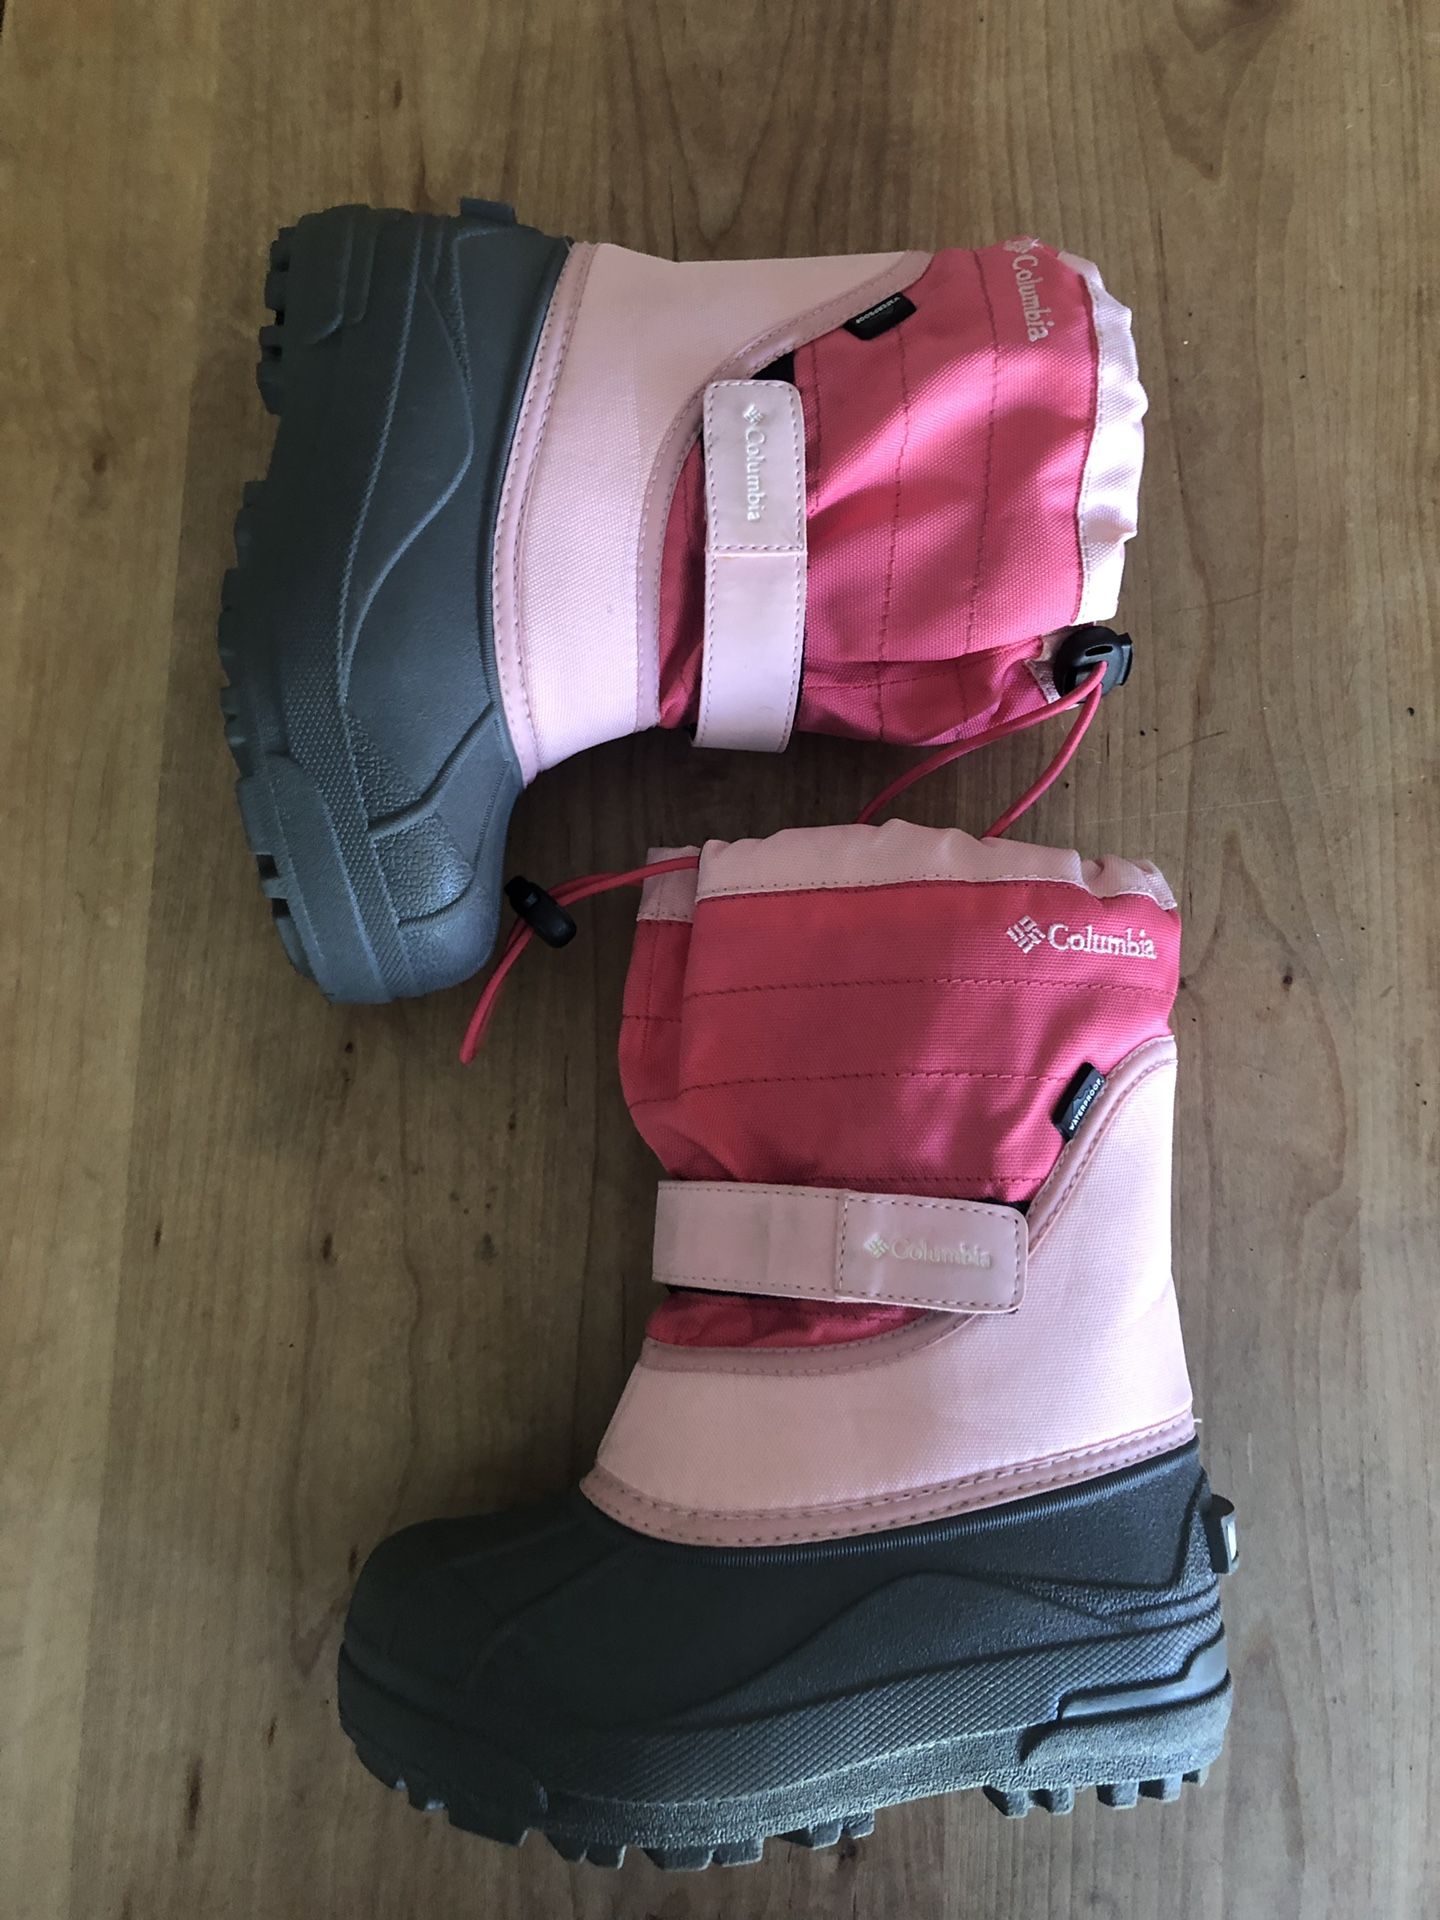 Columbia Kids Size 13 Snow Boots EXCELLENT CONDITION!!